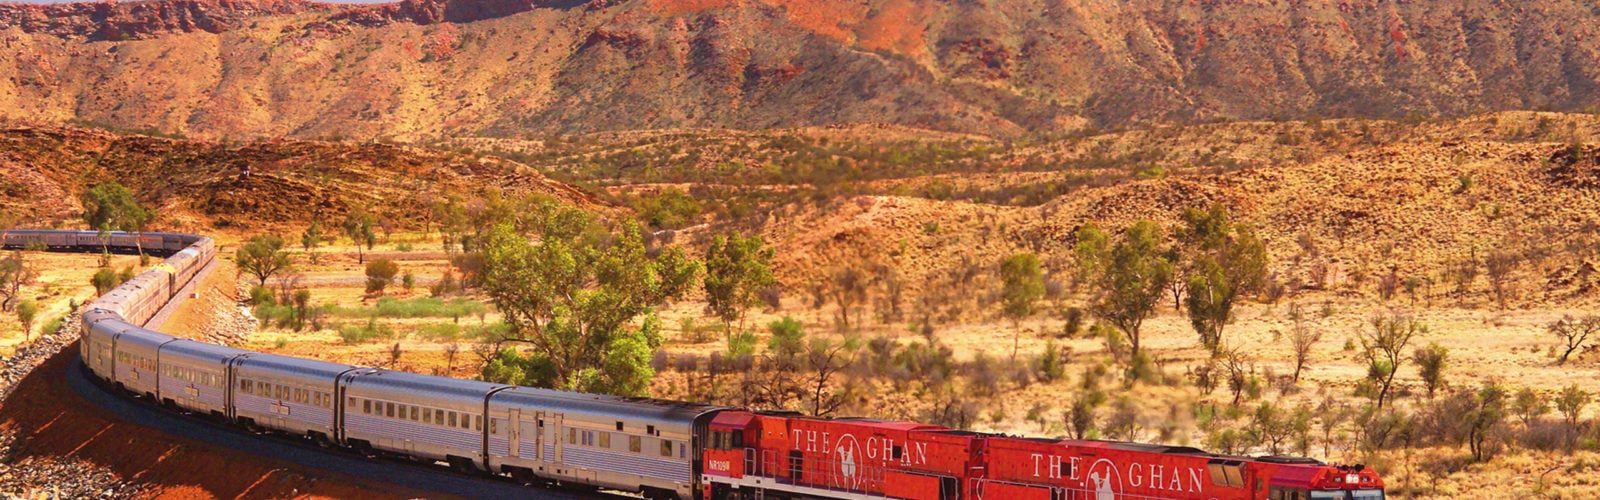 The Ghan train and landscape